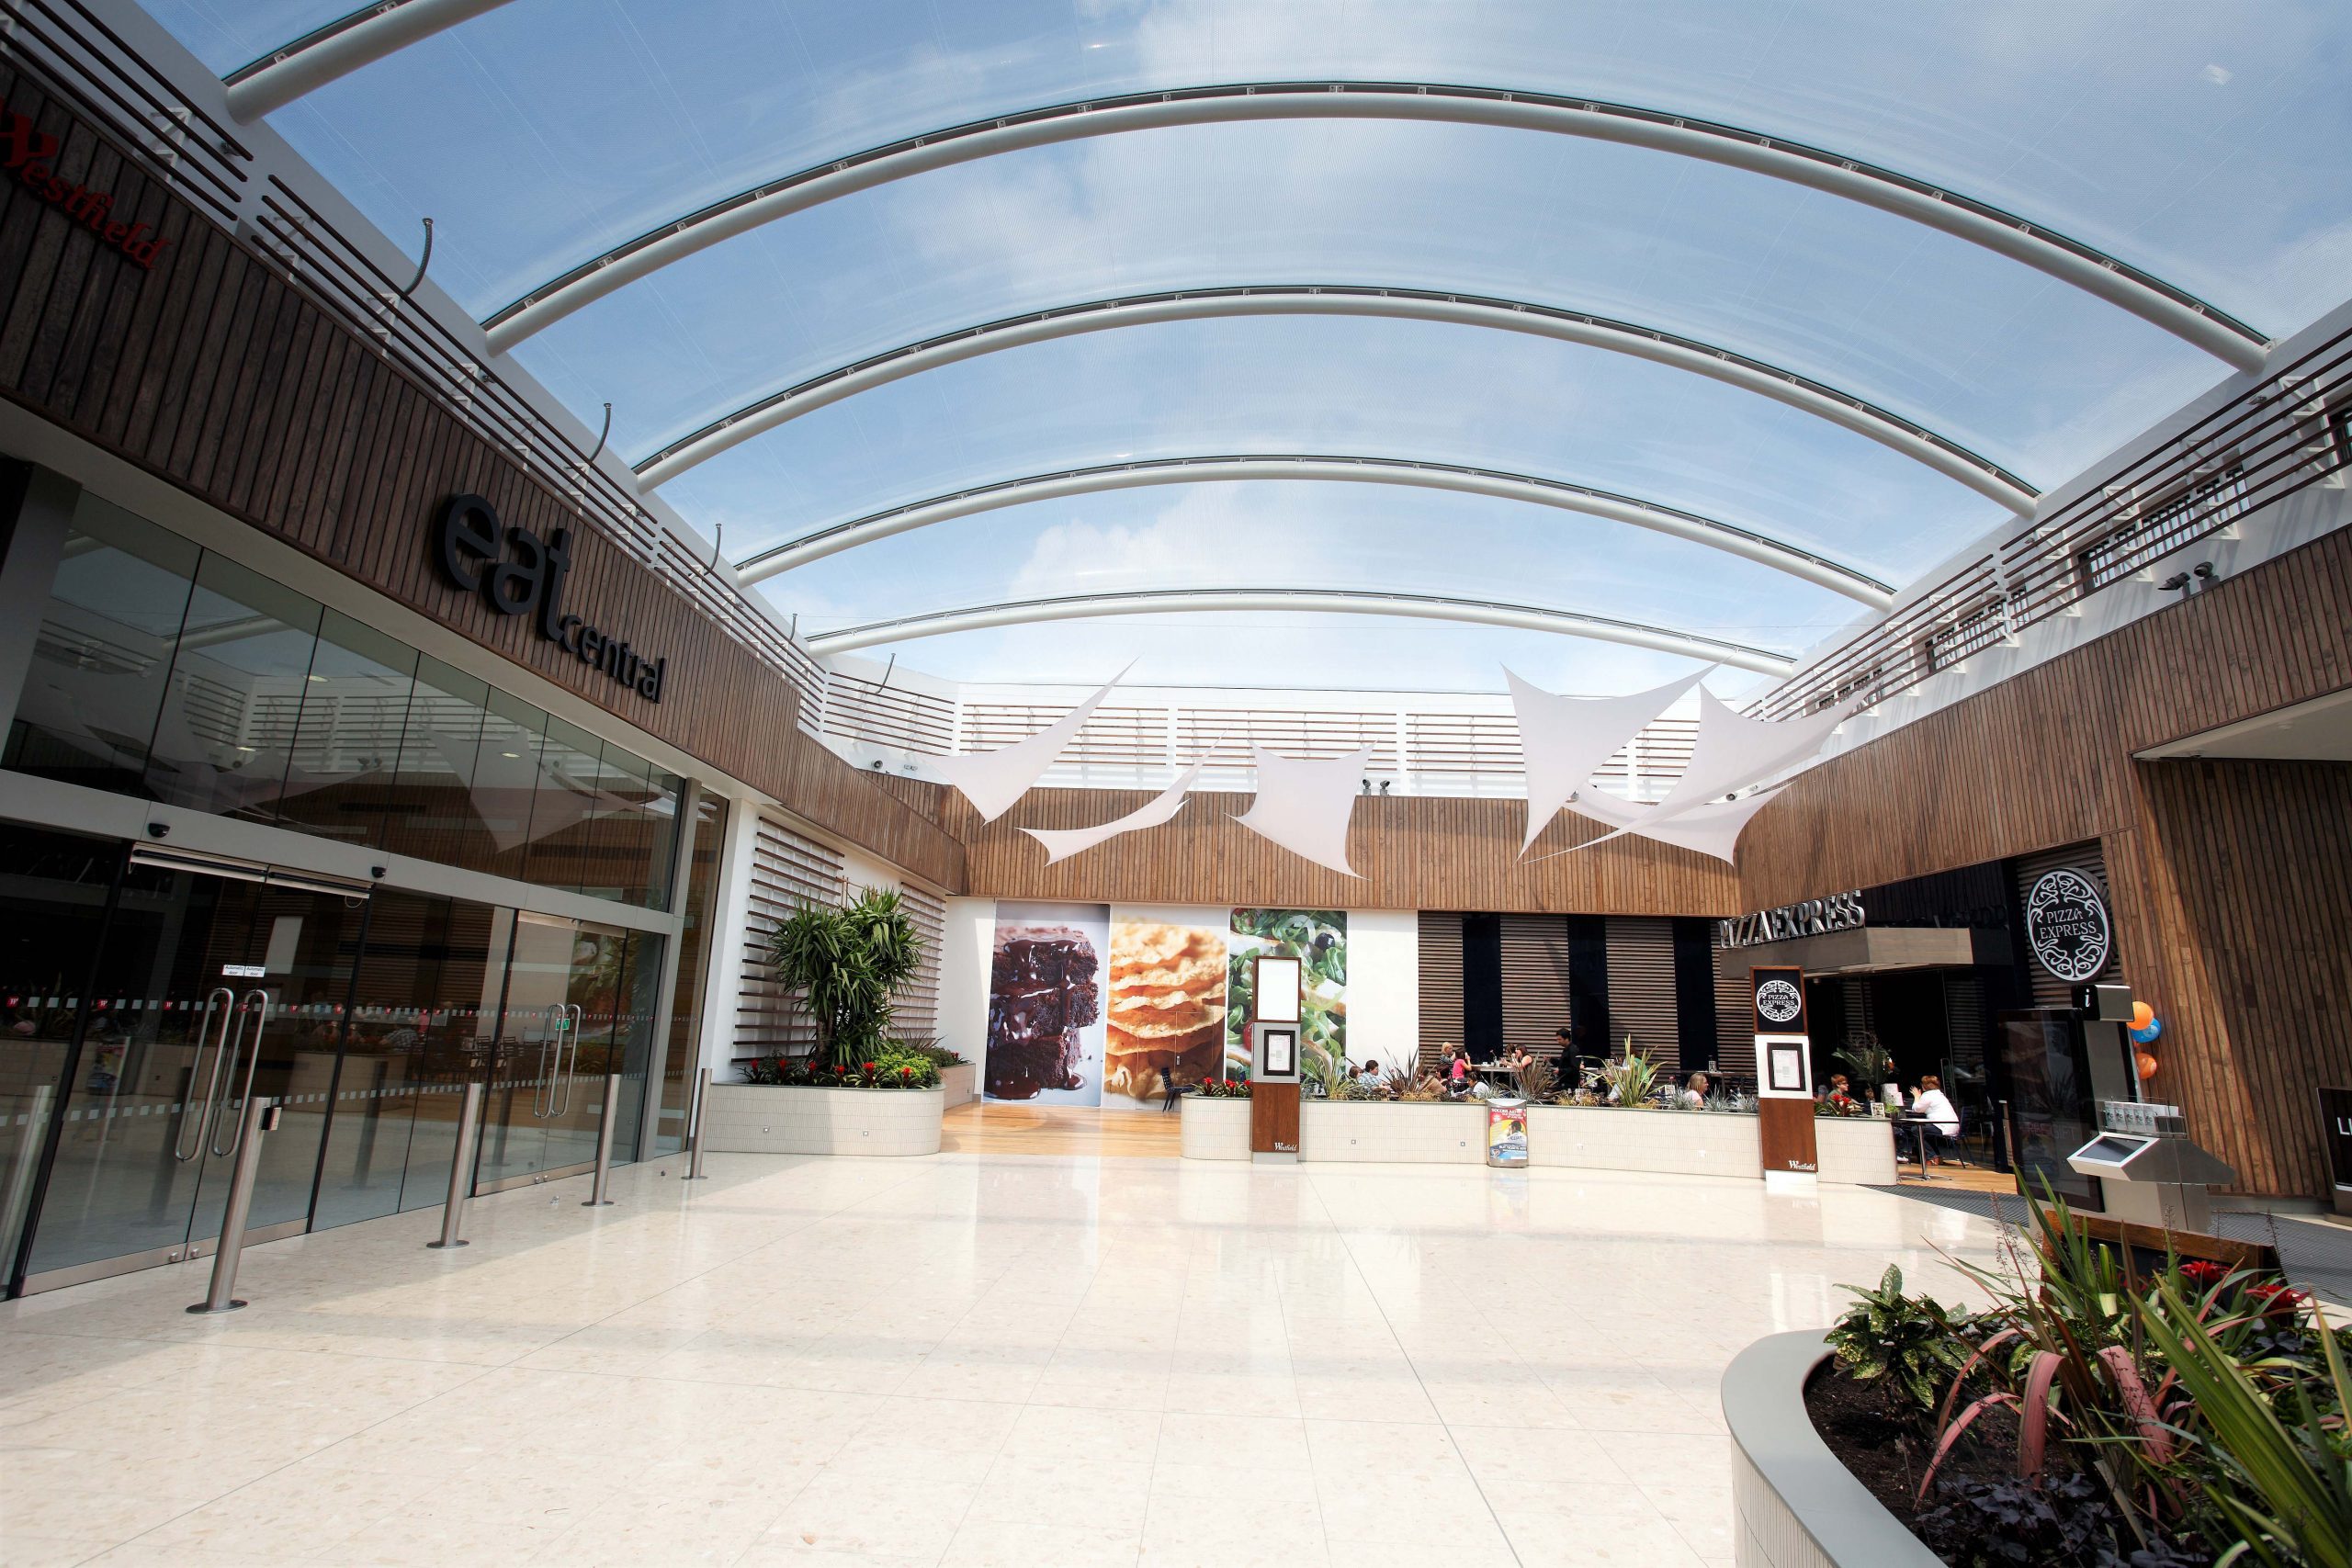 The Orangery at Merry Hill Shopping Centre